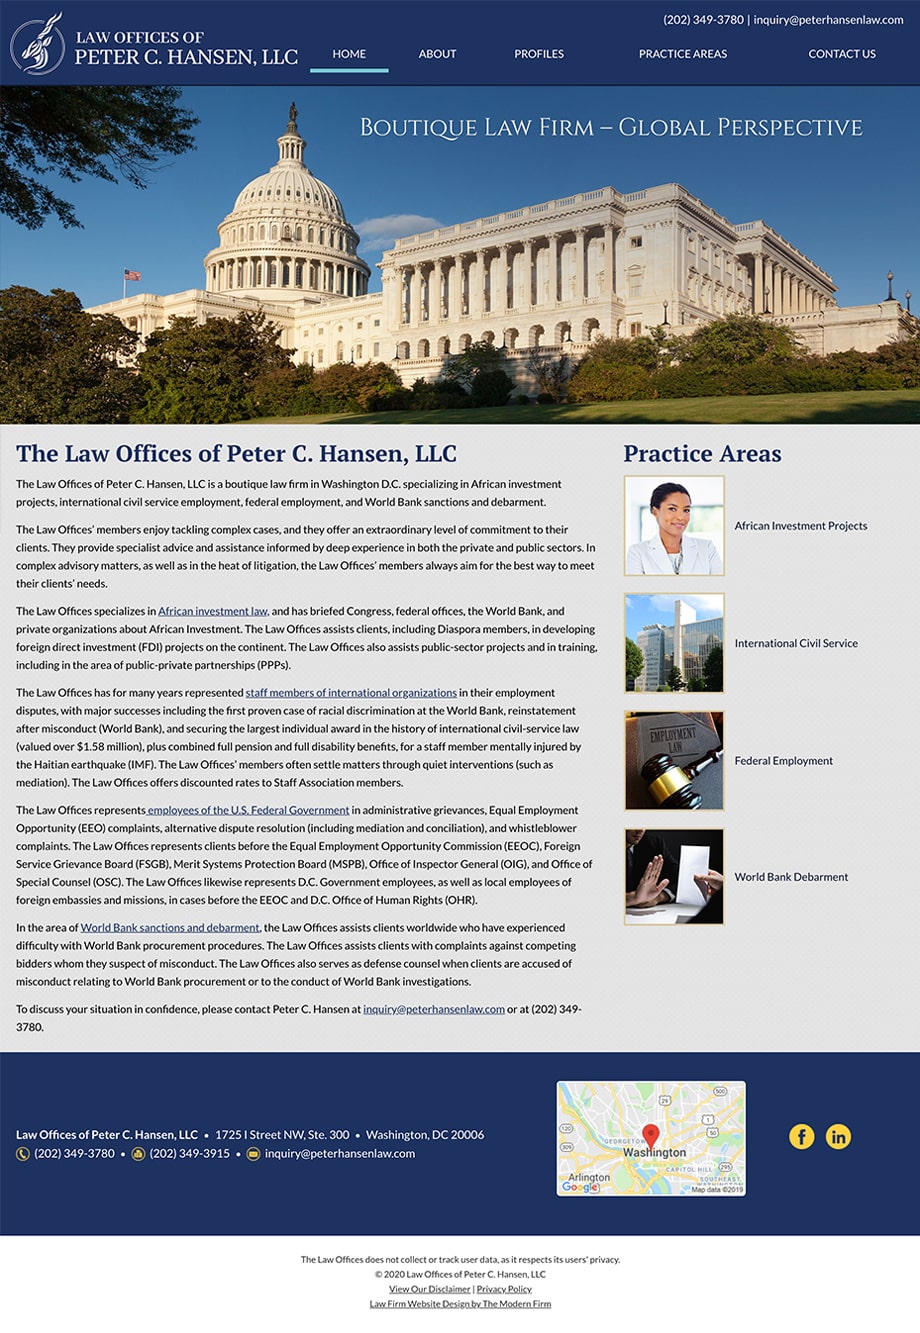 Law Firm Website Design for Law Offices of Peter C. Hansen, LLC